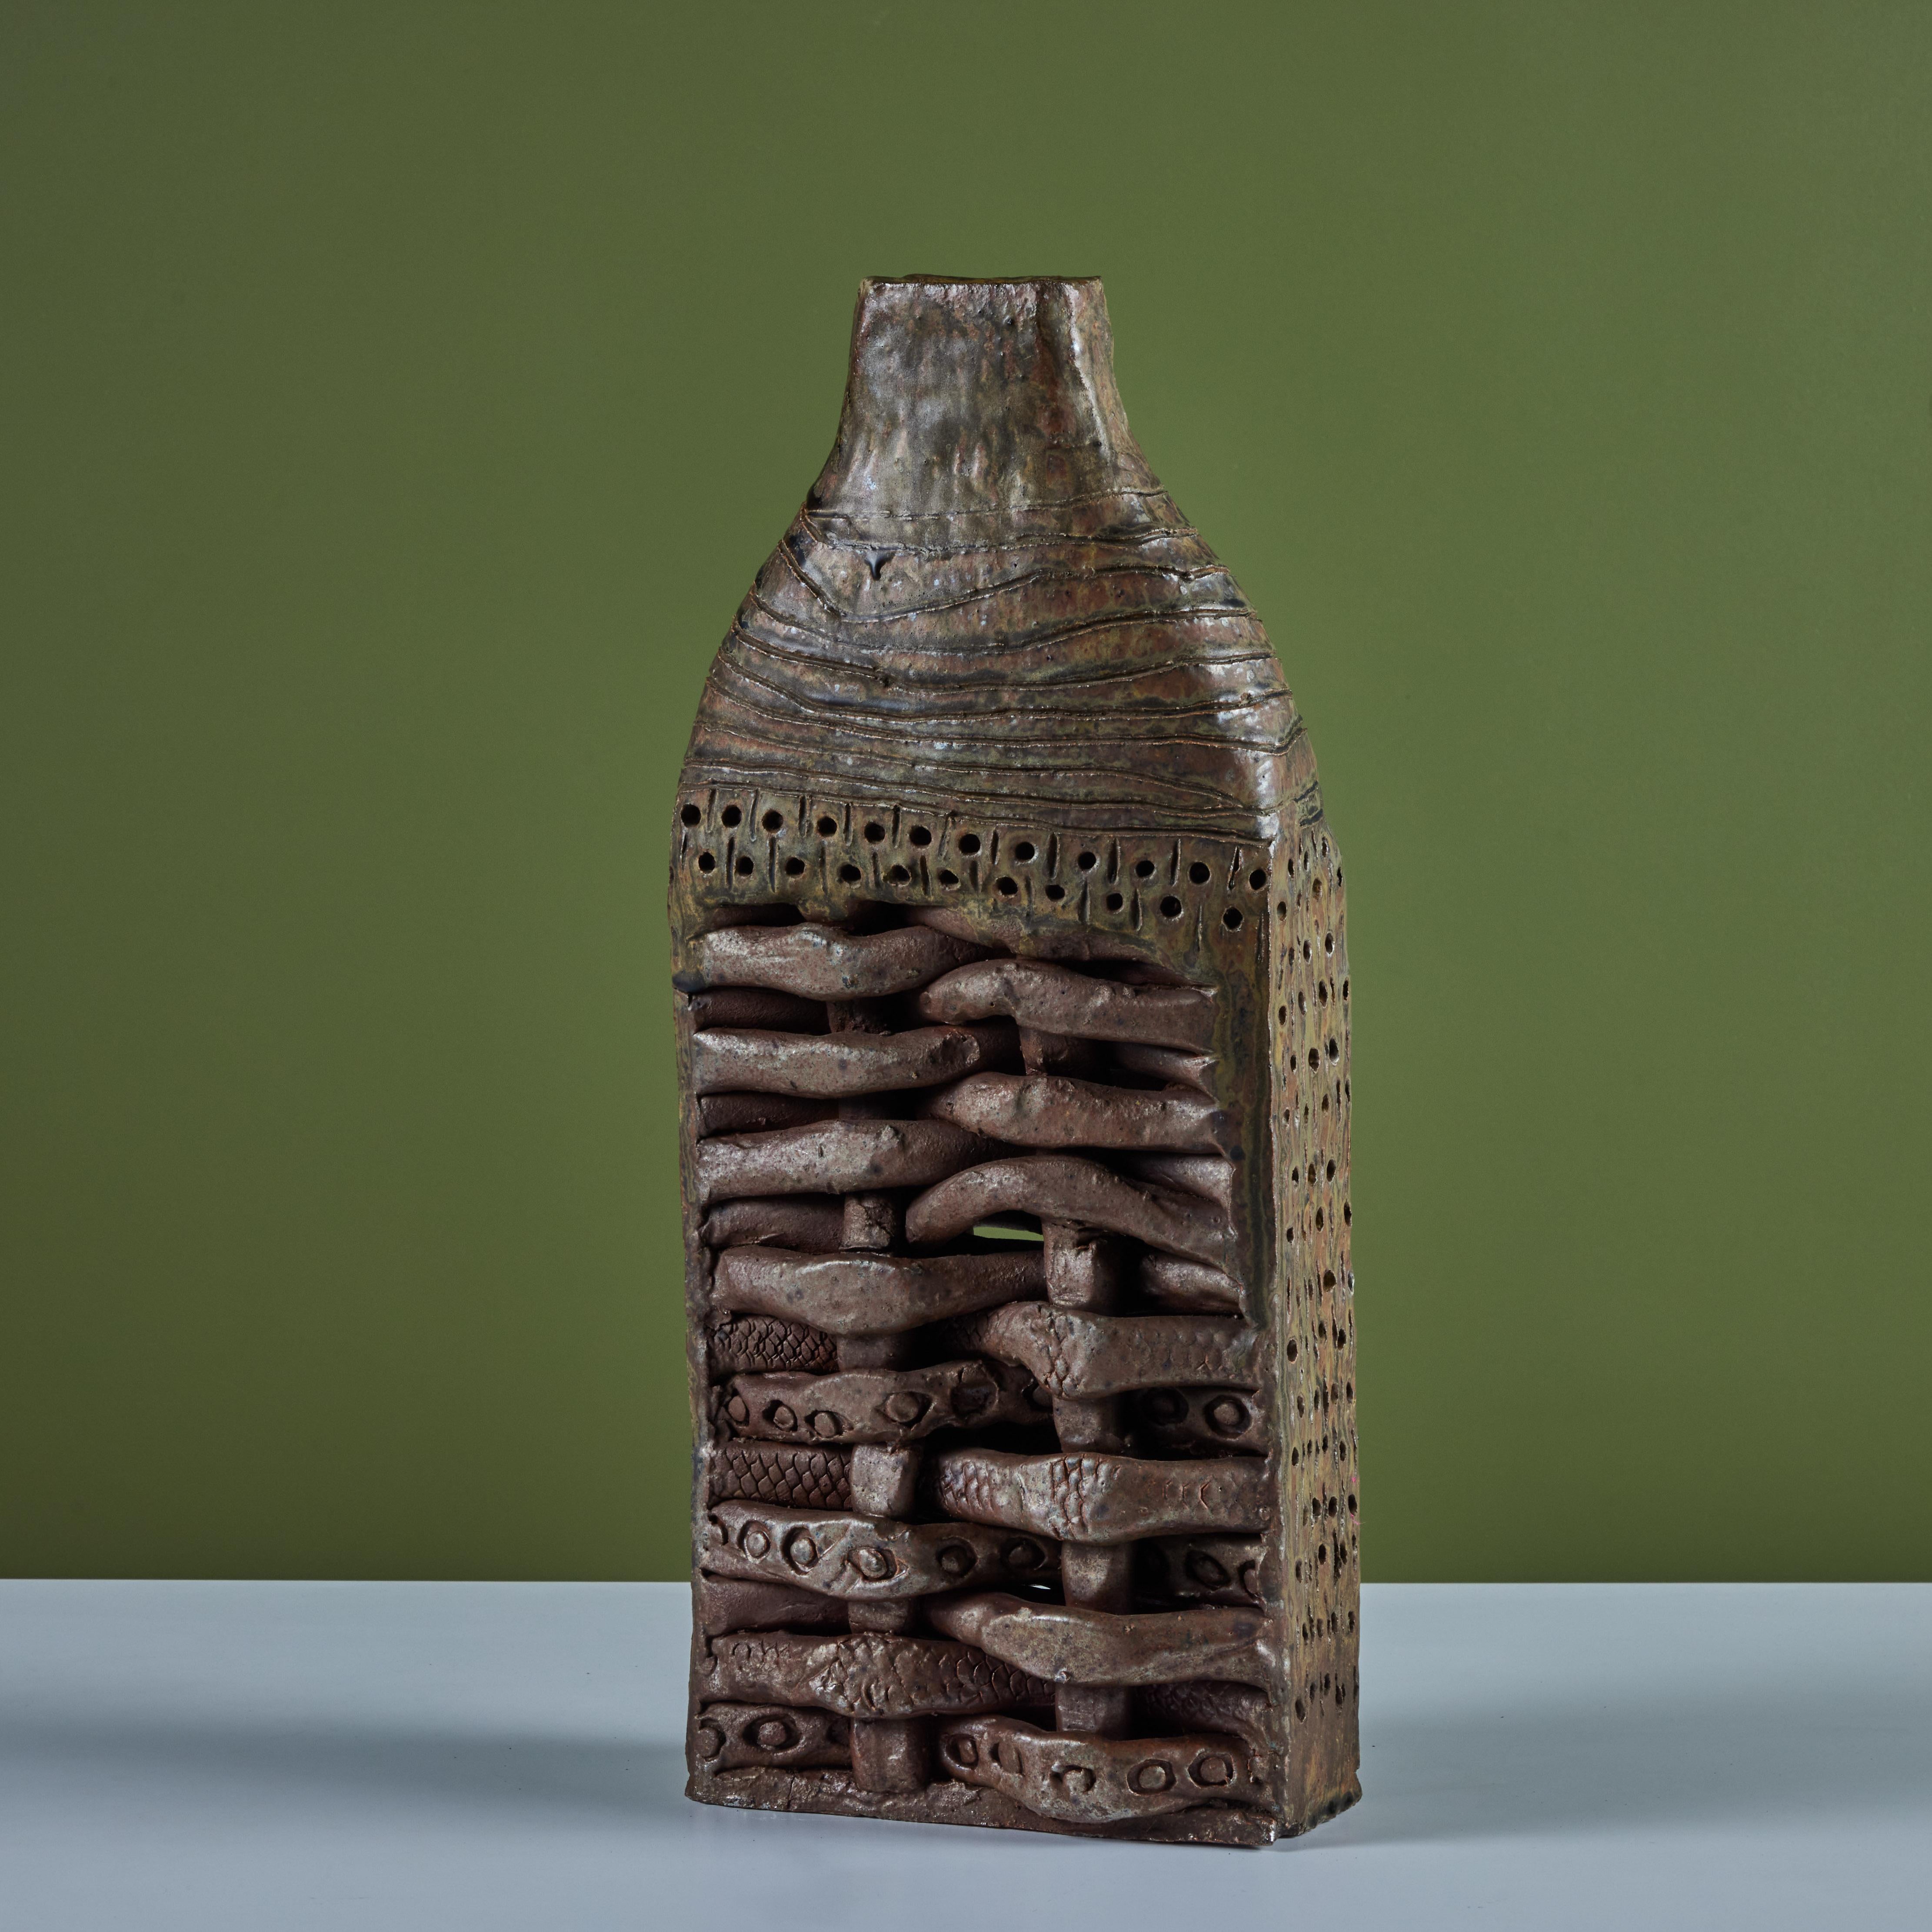 20th Century Hand Built Brutalist Japanese Ceramic Sculpture by Takao Tomono For Sale